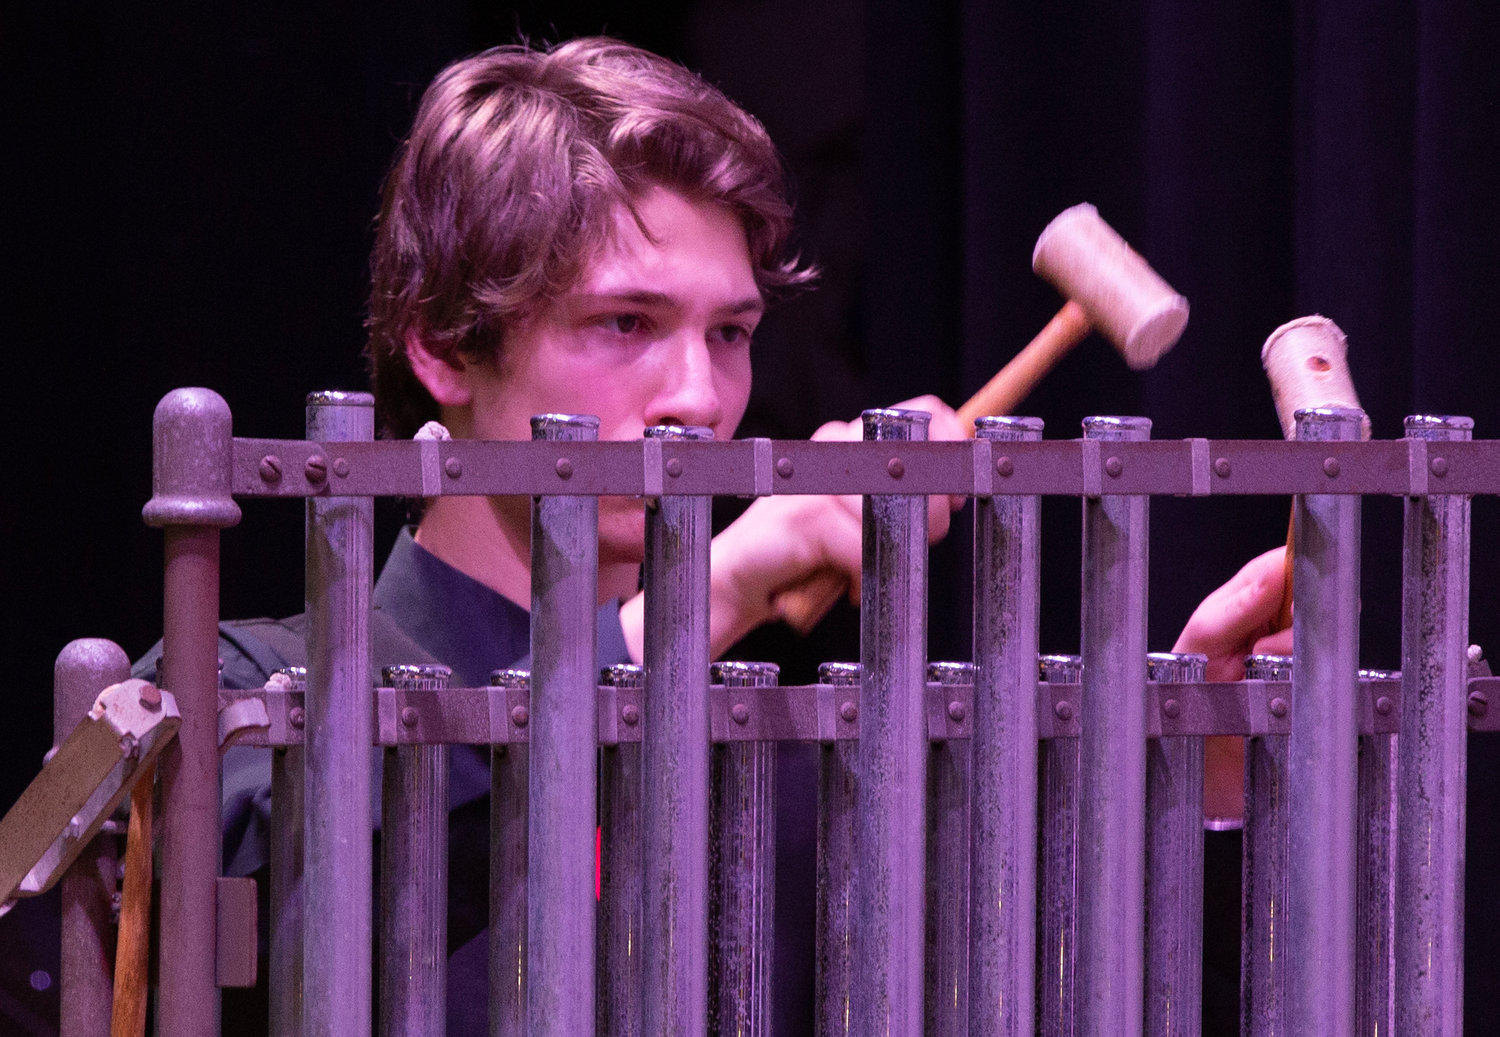 Evan Bogiovanni plays the chimes during “The Great Locomotive Chase.”